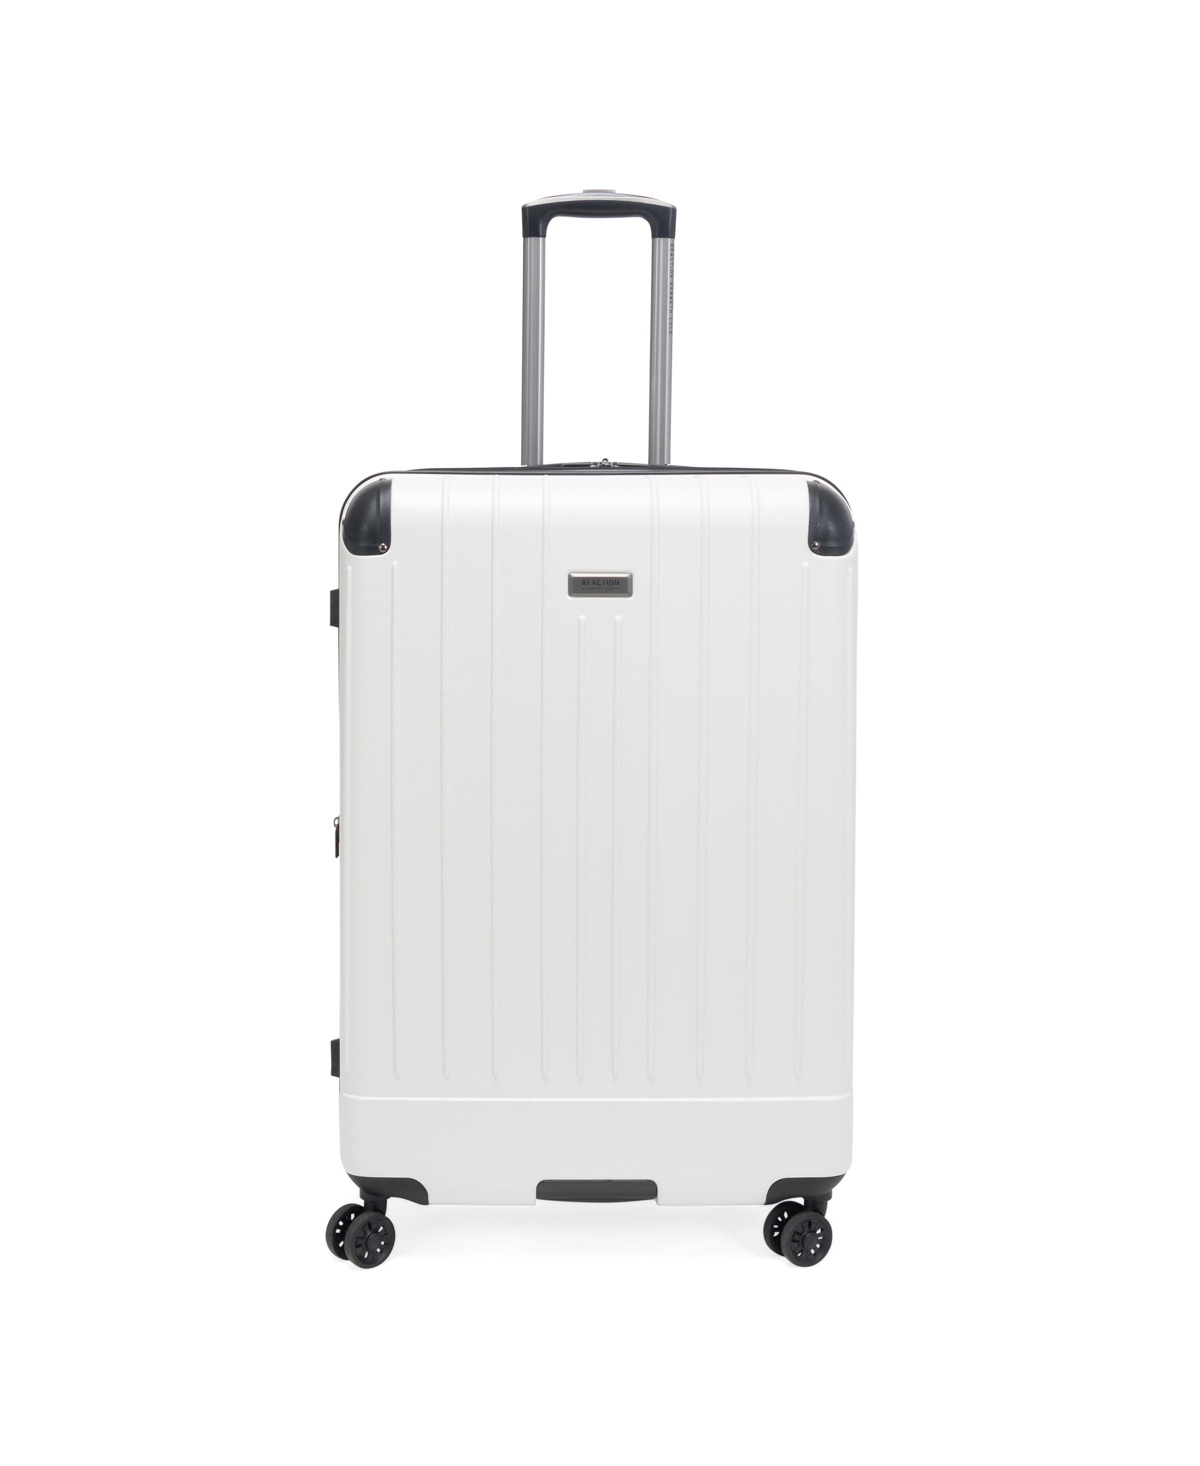 Flying Axis 28" Hardside Expandable Checked Luggage - Coconut White